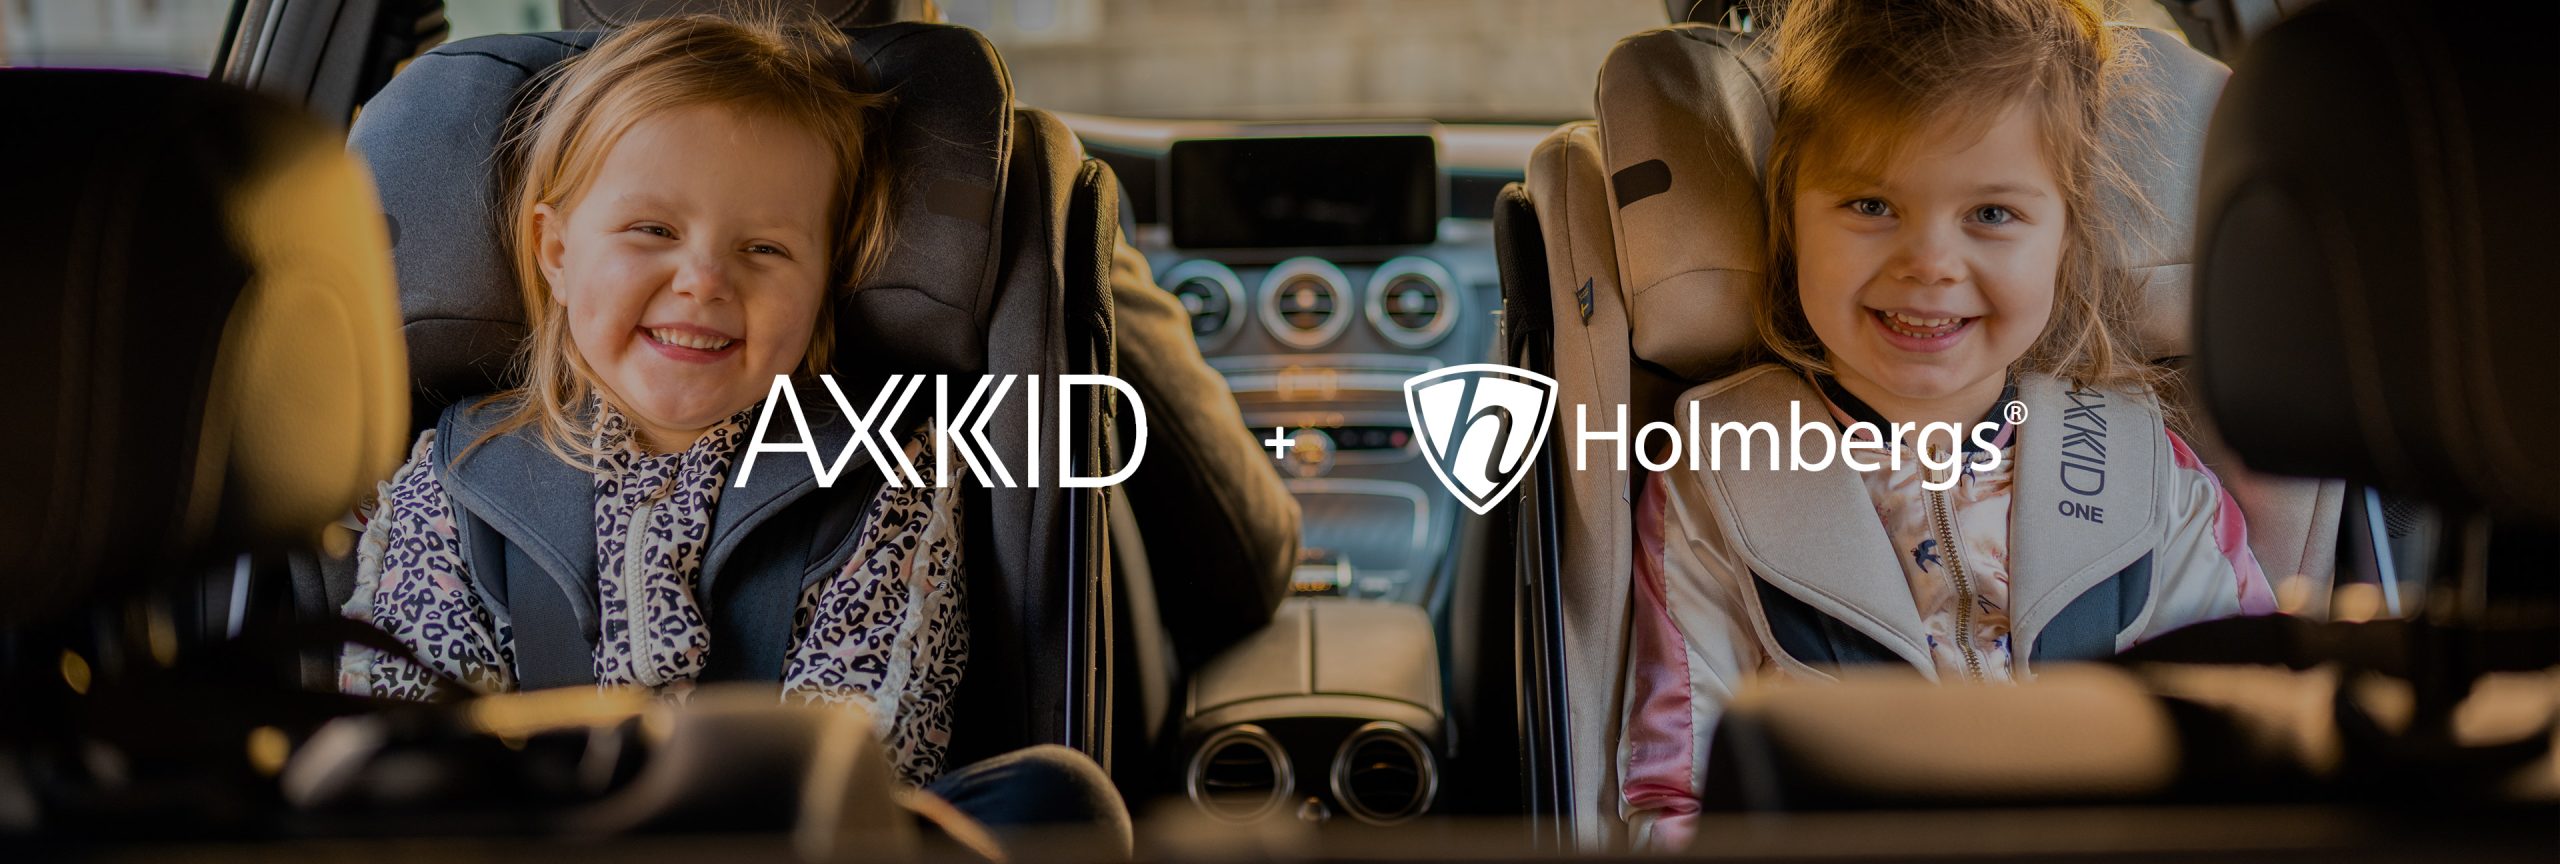 Axkid and Holmbergs partner in safety